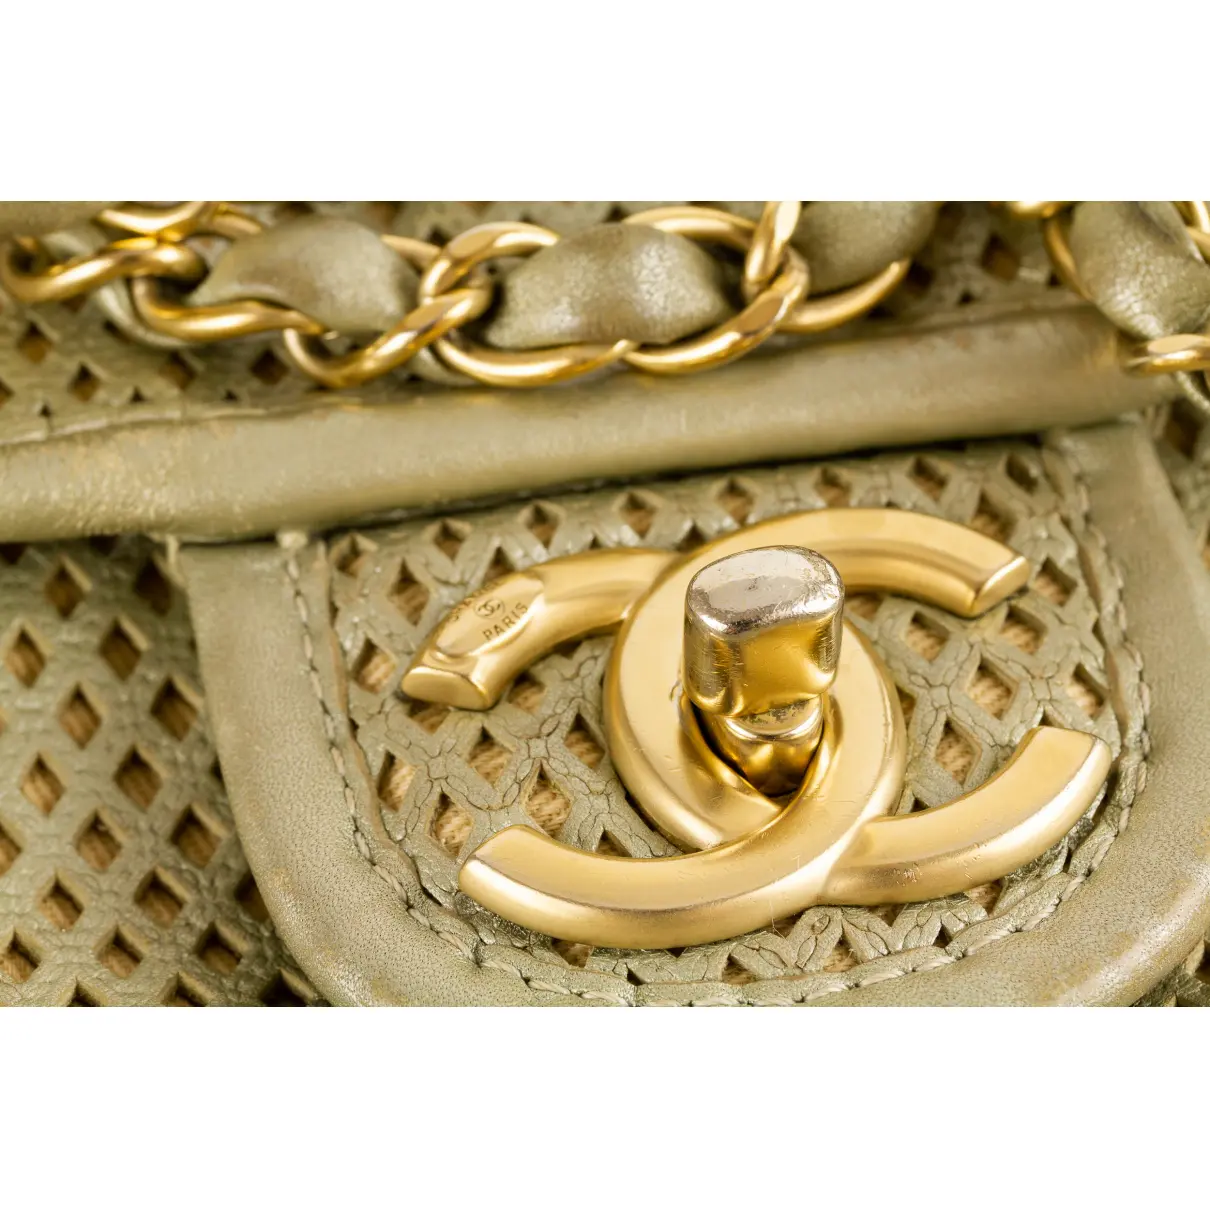 Up In The Air leather handbag Chanel